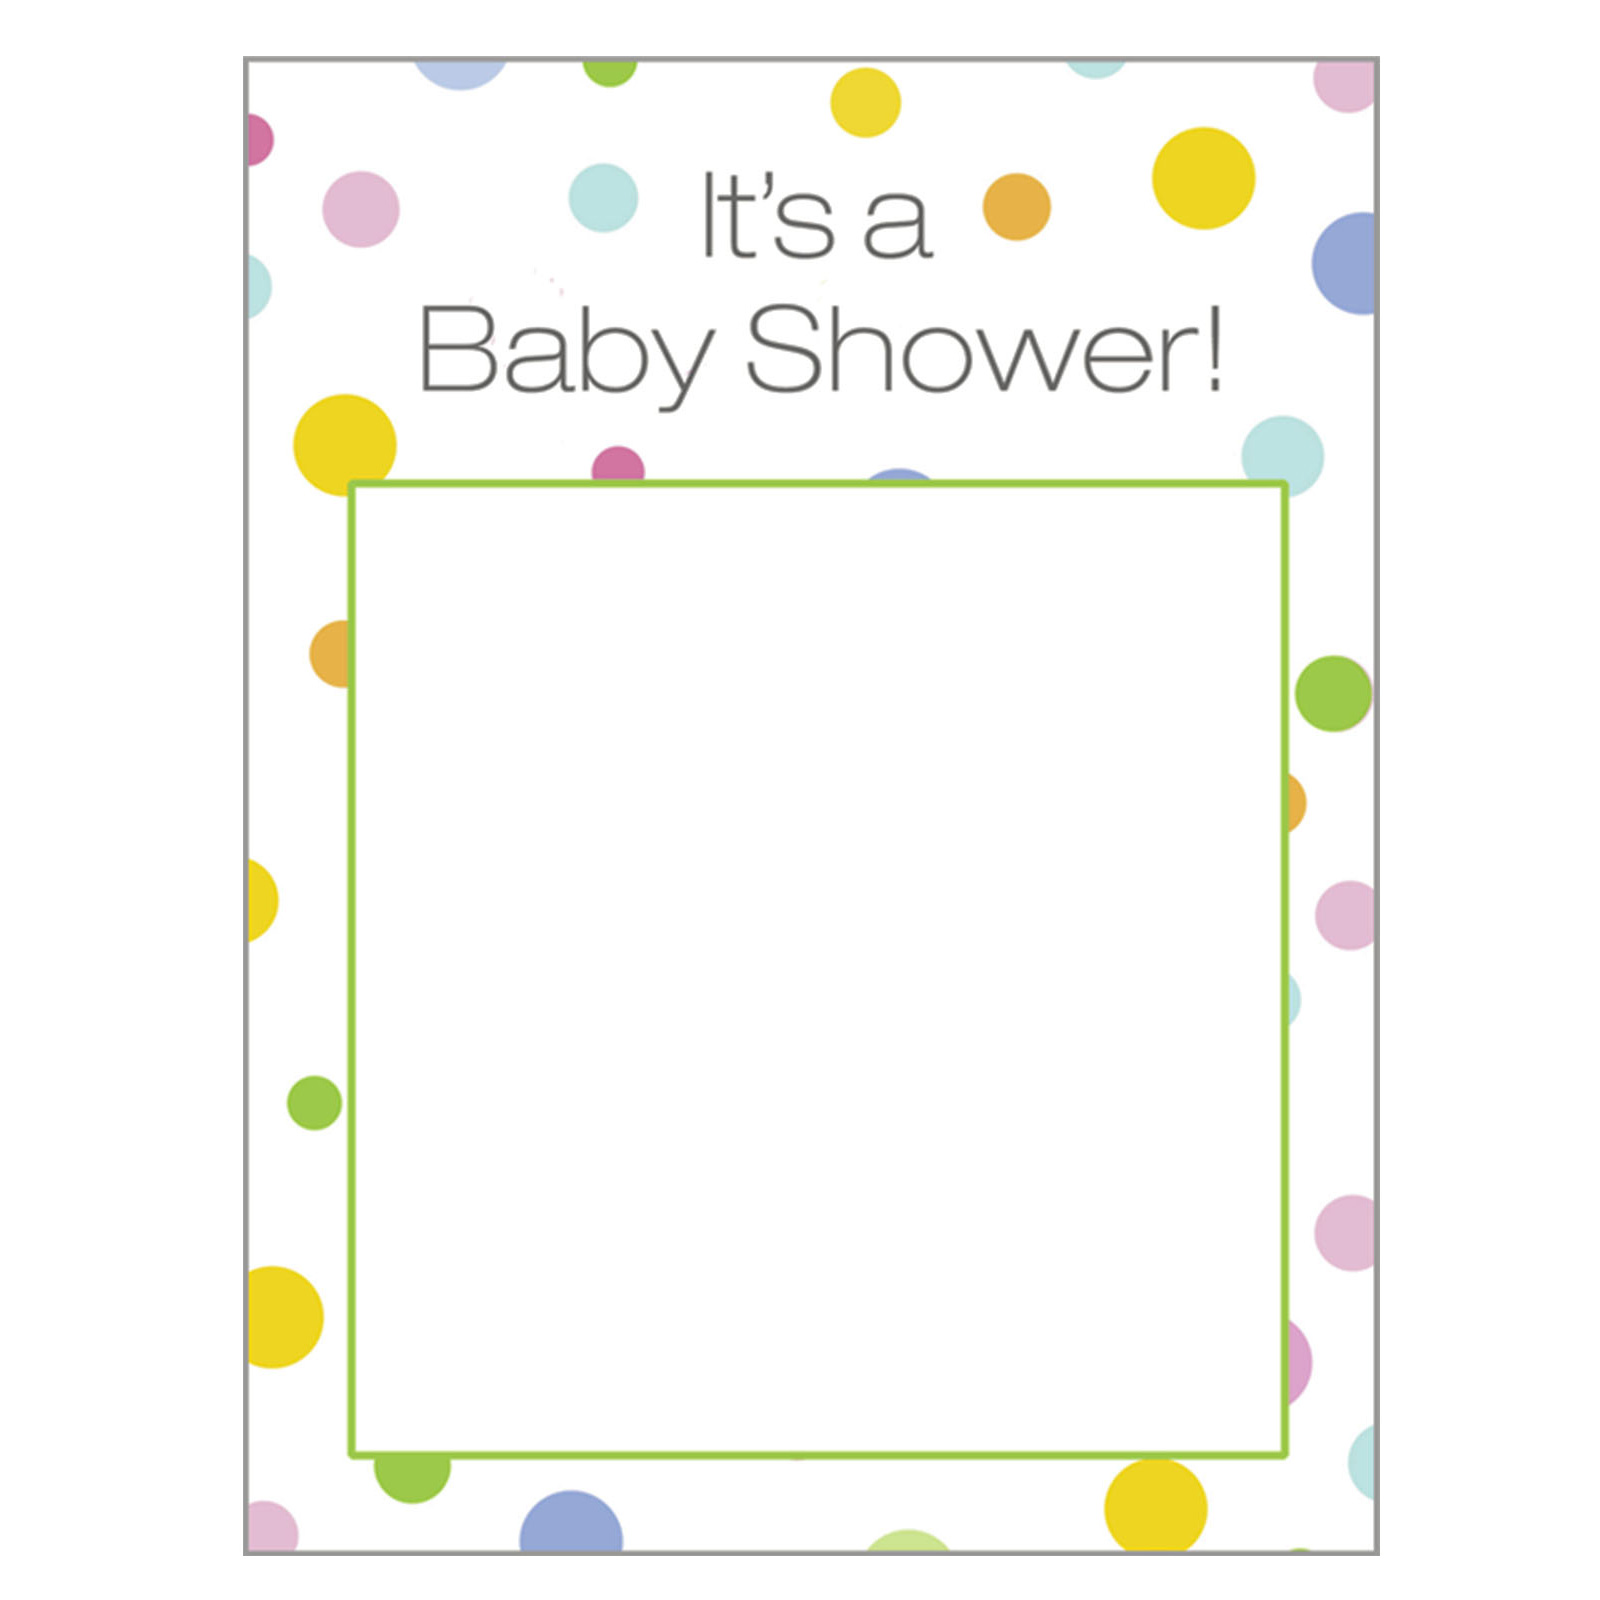 clipart for baby shower invitations free - photo #14